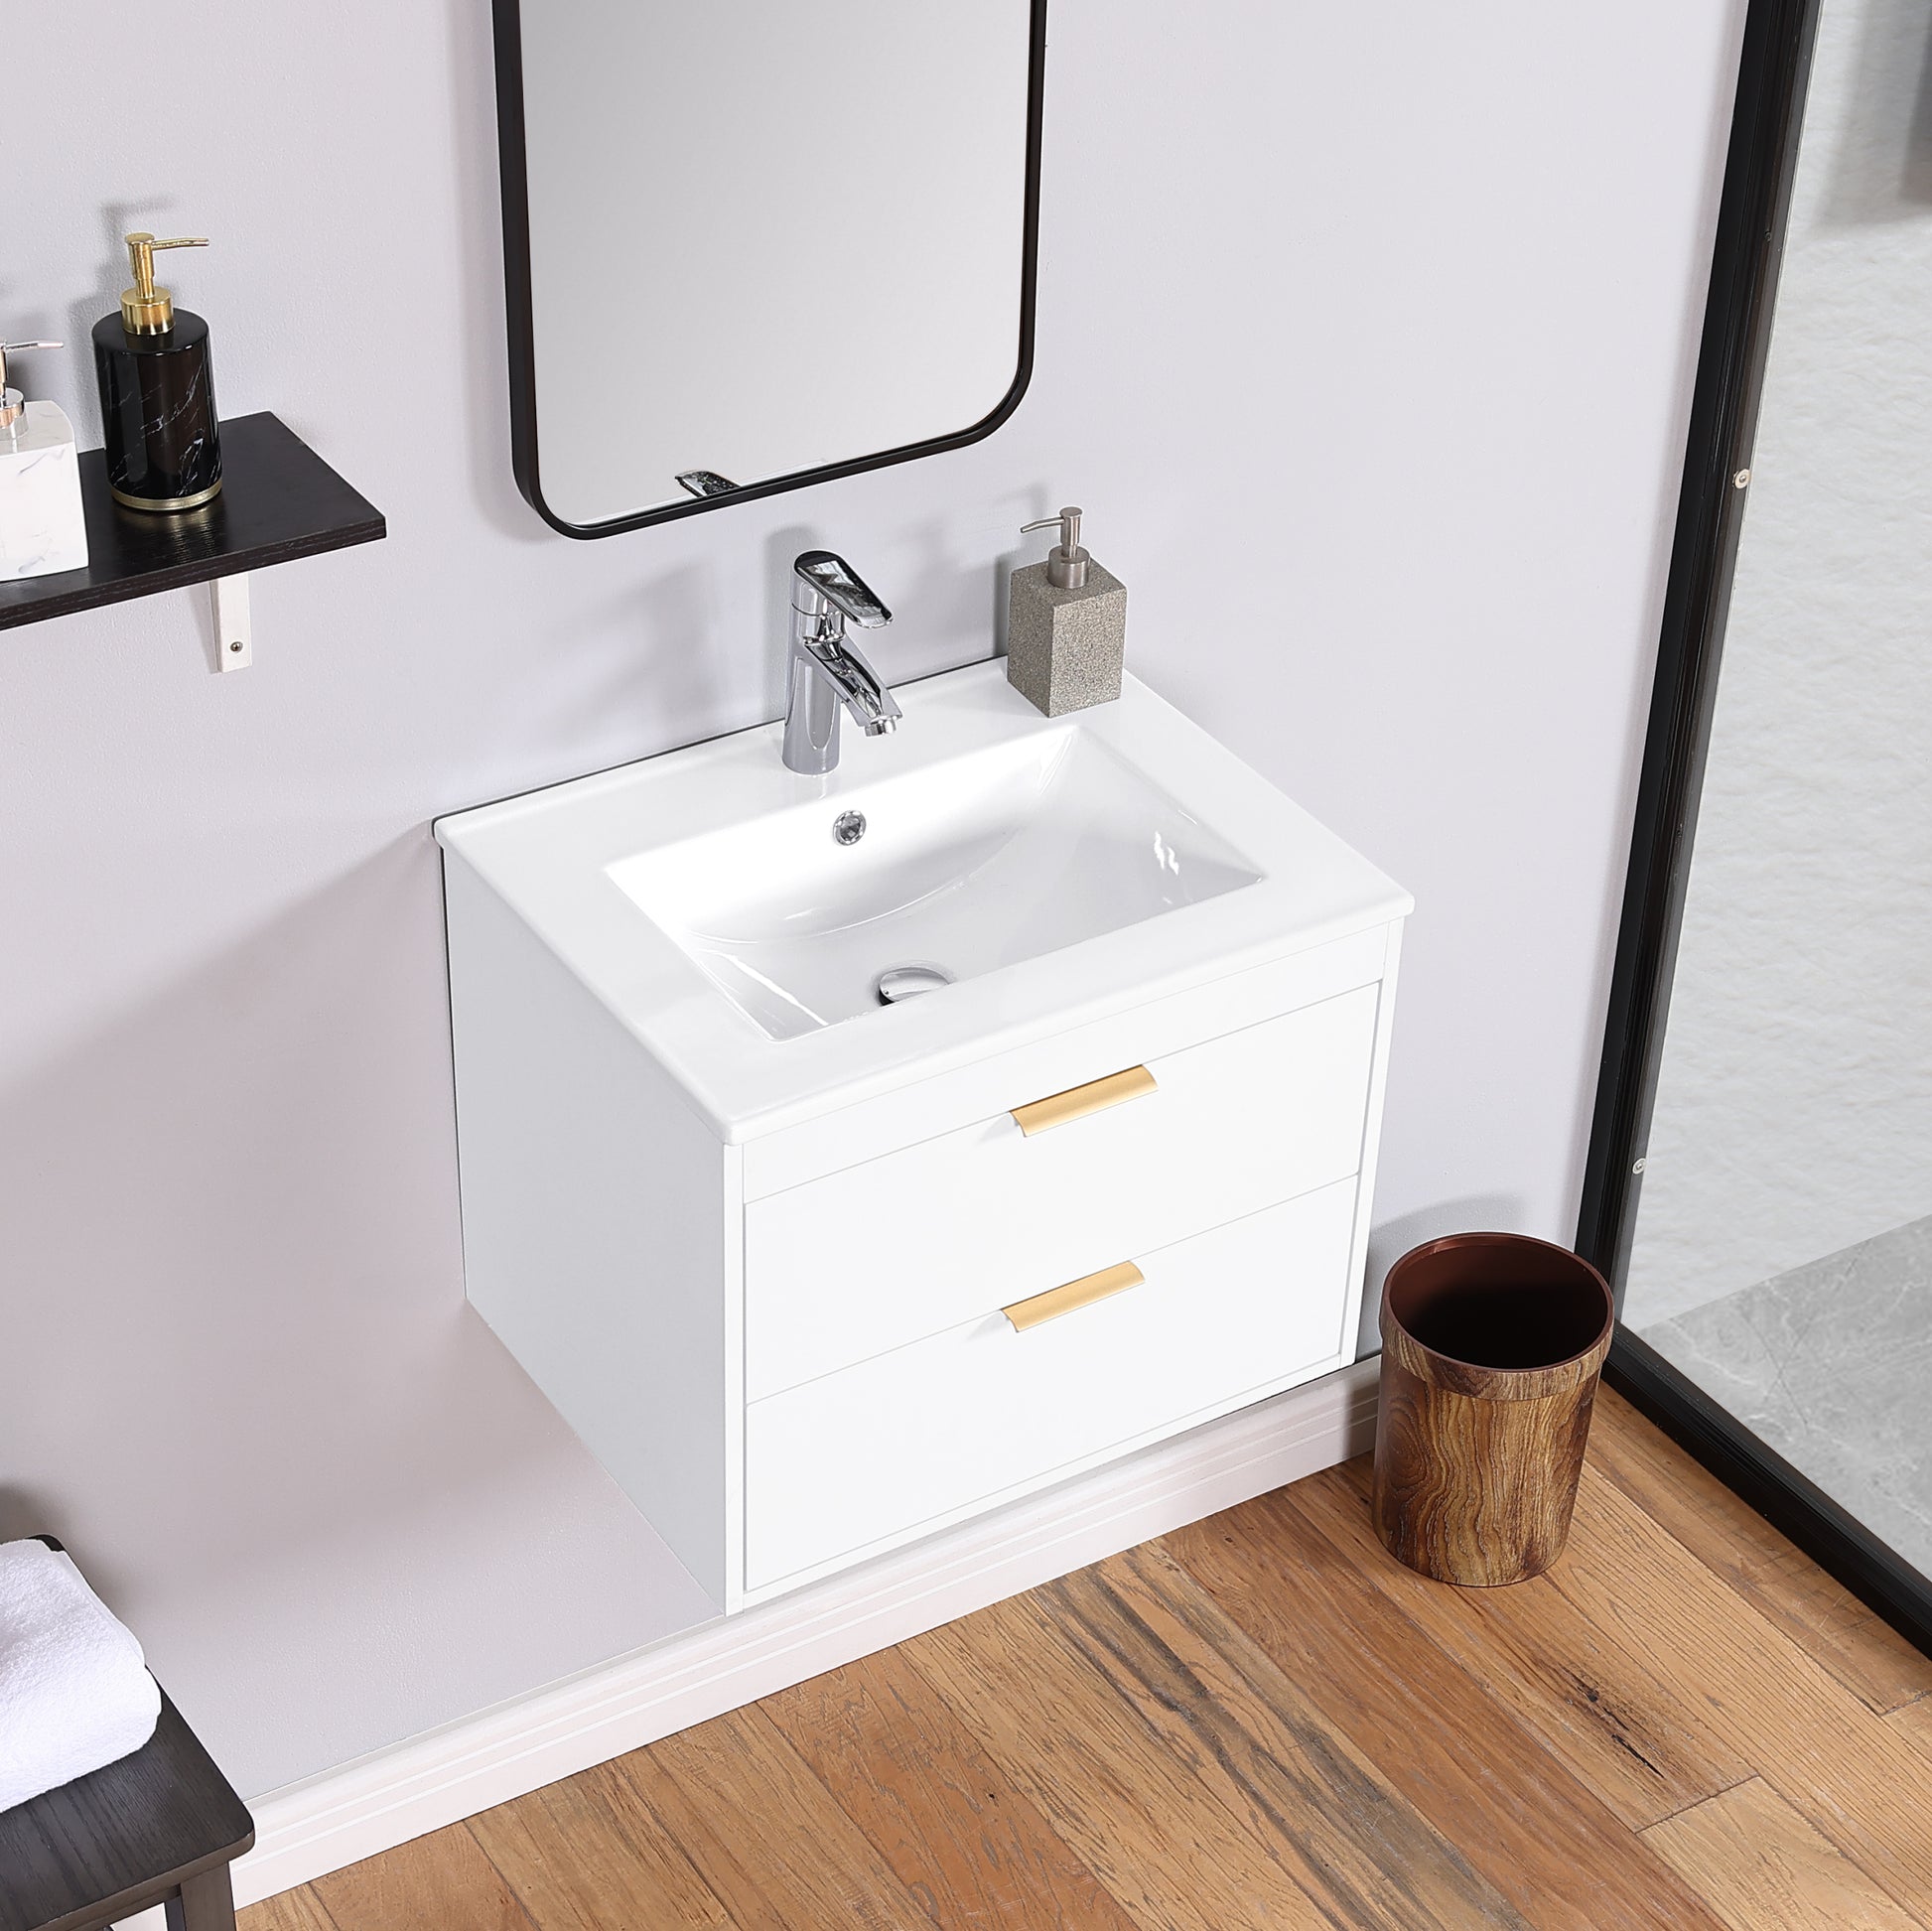 24" floating wall mounted bathroom vanity with white white-wall mounted-ceramic+mdf